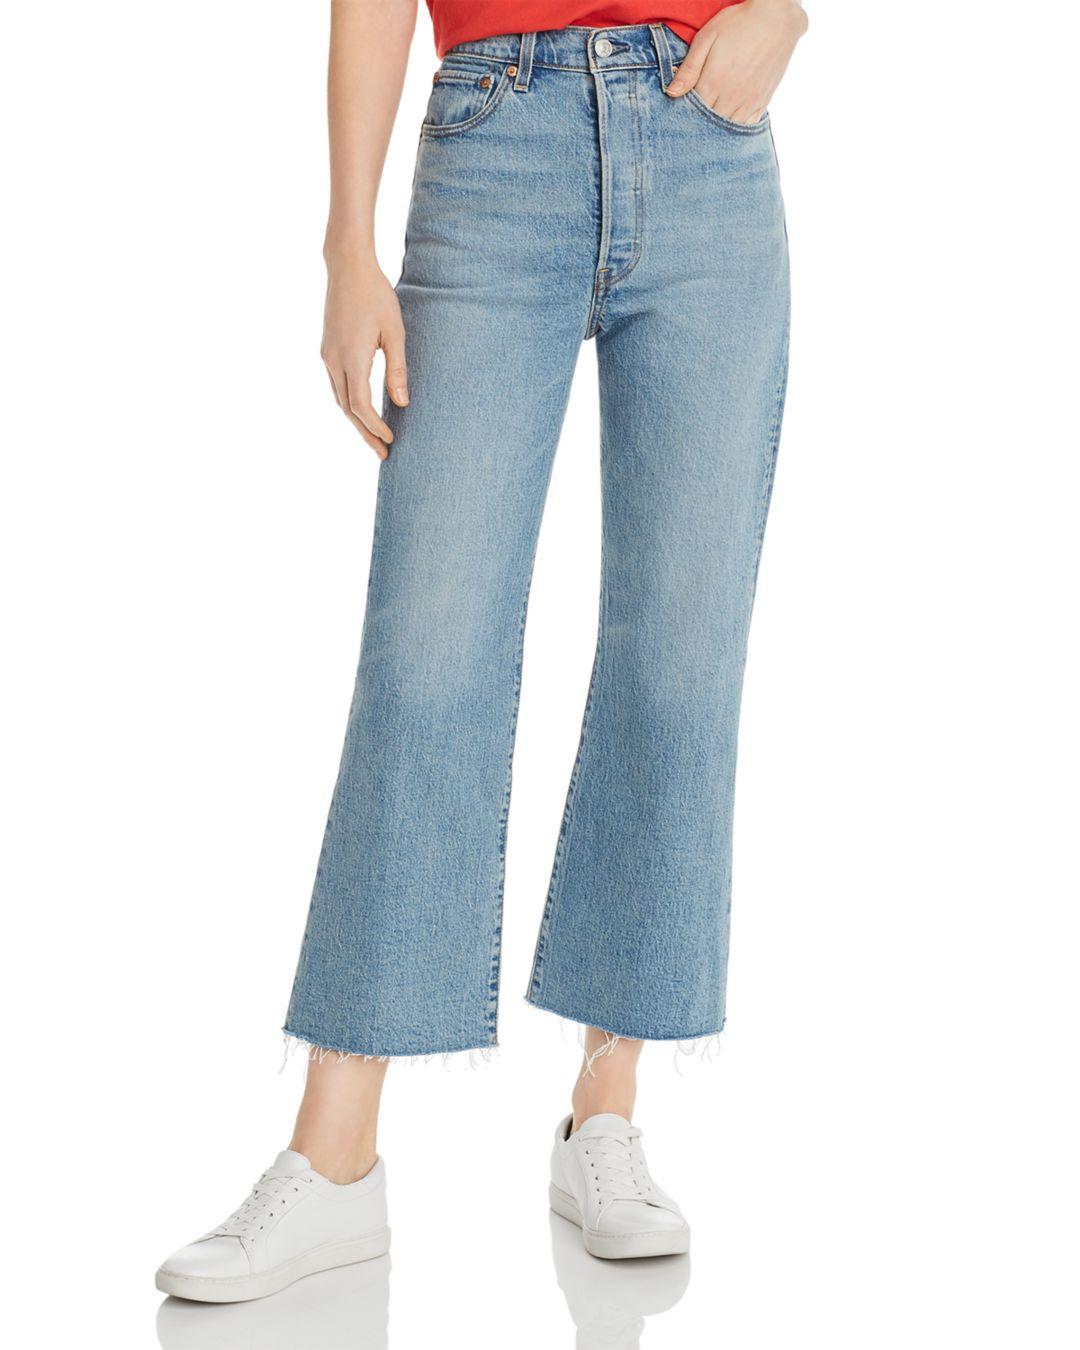 Levi's Denim Rib Cage Crop Flare Jeans In Scapegoat in Blue - Lyst